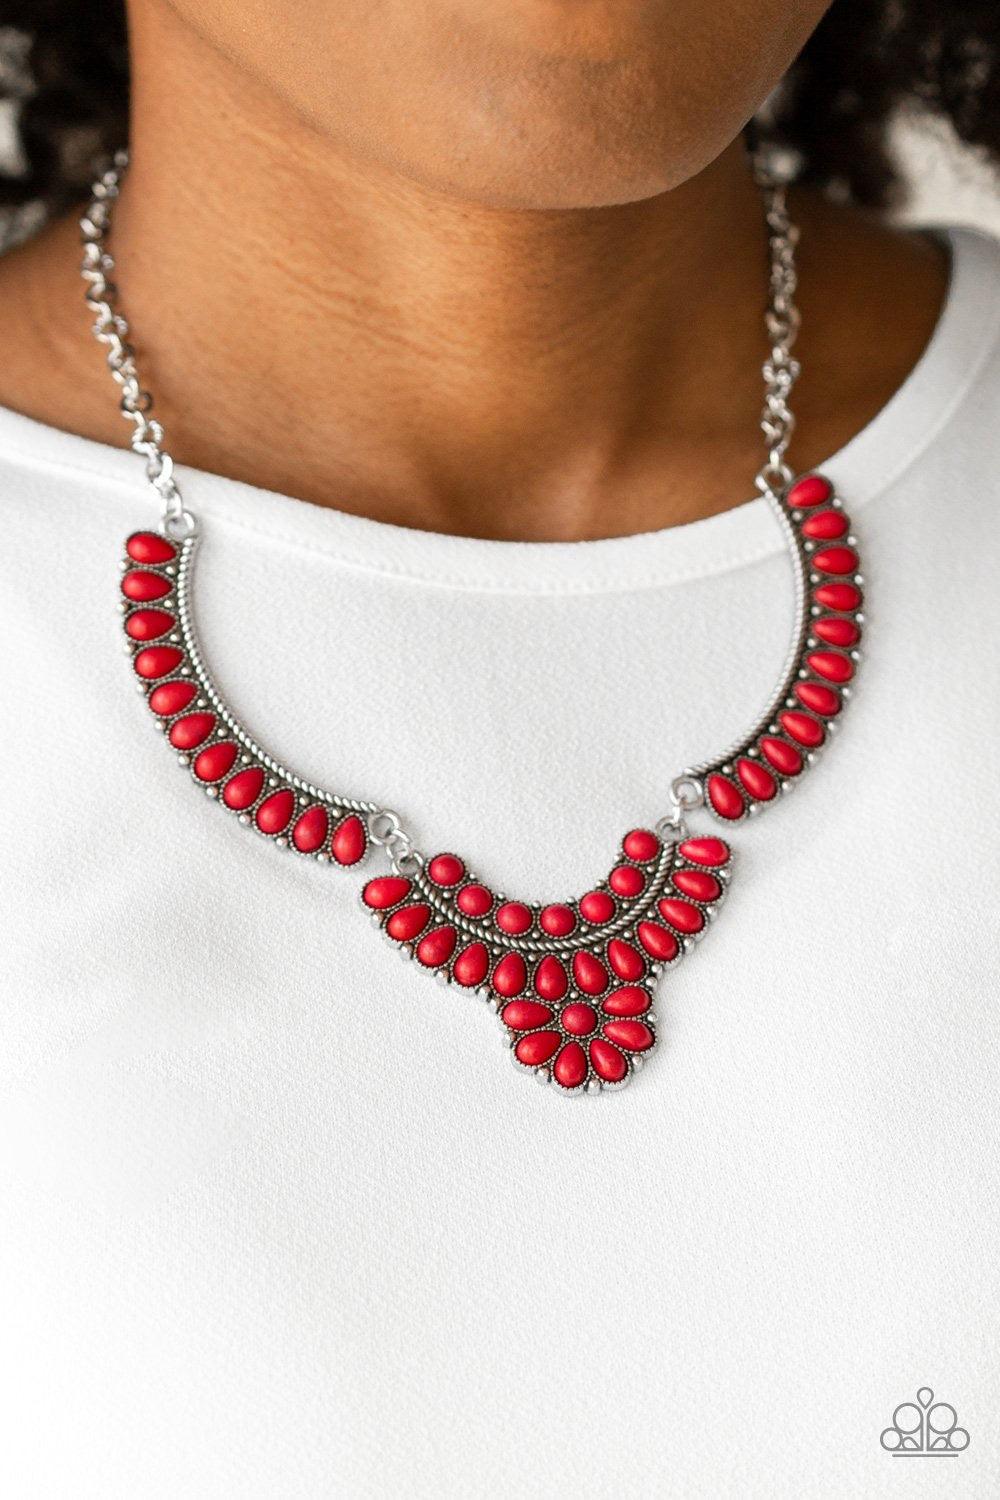 Paparazzi Accessories Omega Oasis - Red Featuring round and teardrop shapes, a collection of tranquil red stone beads are pressed into interconnected silver plates, creating a fiery floral inspired statement piece below the collar. Features an adjustable